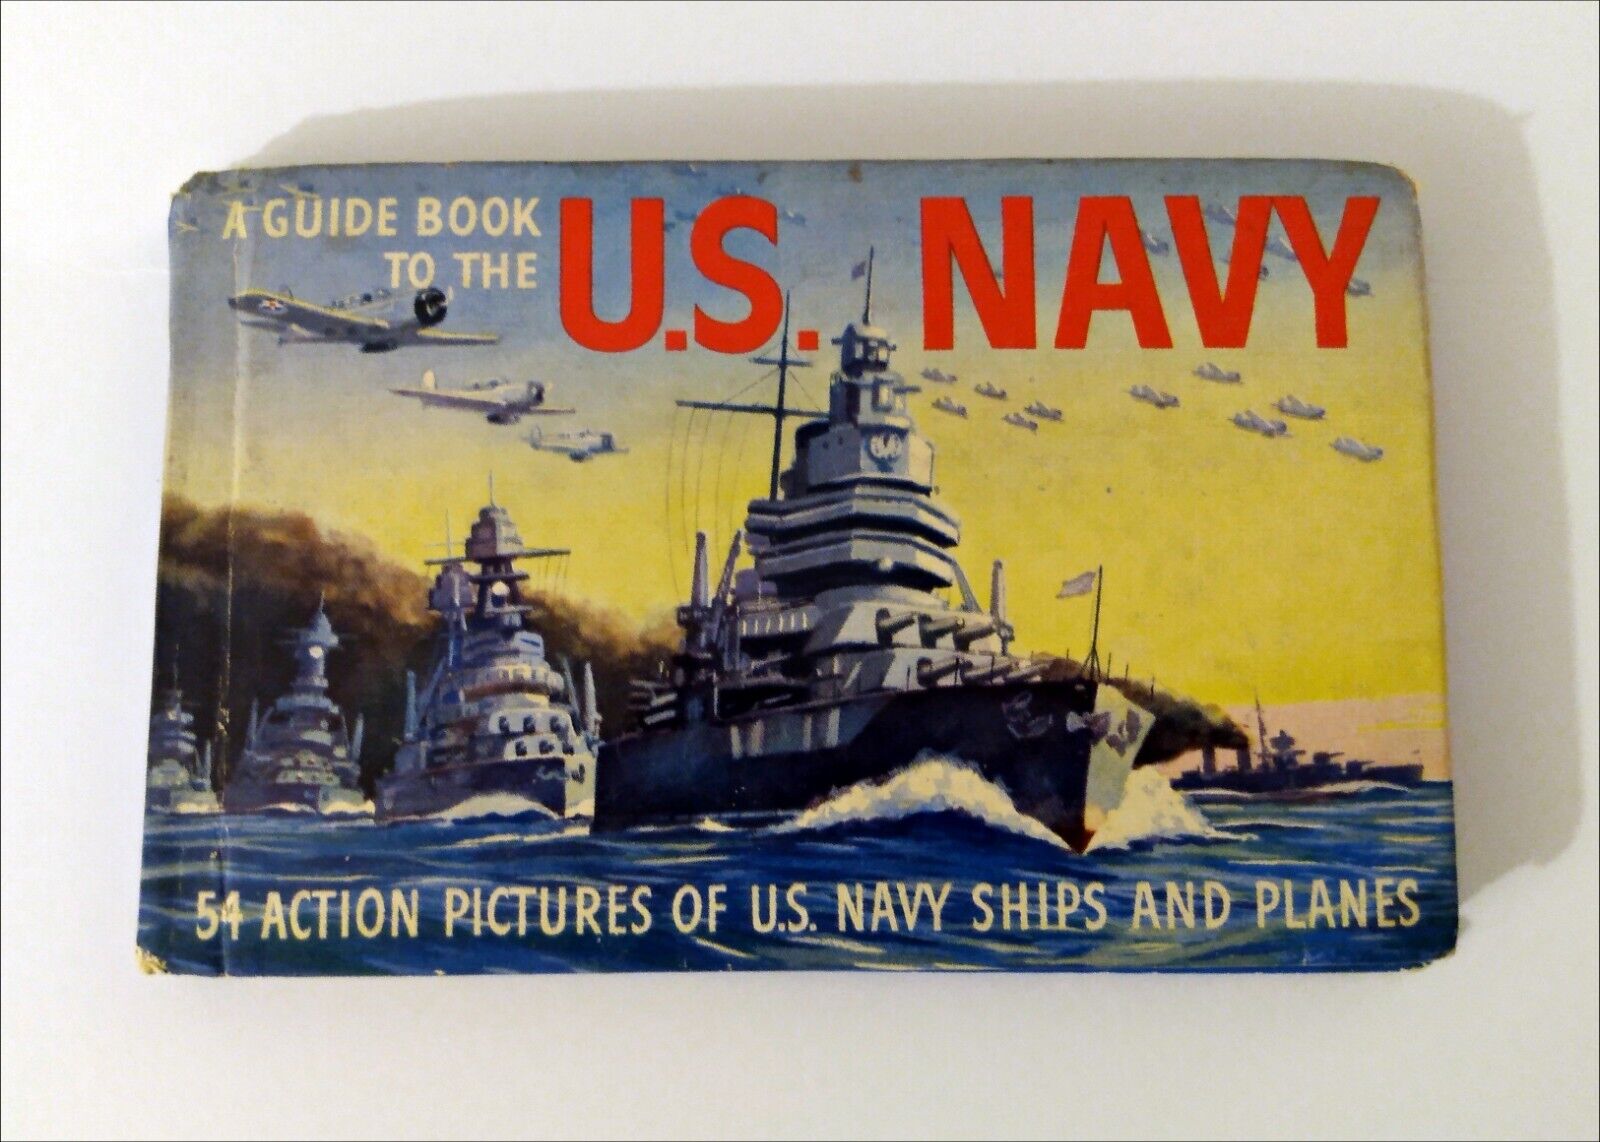 The U S Navy-A Guide Book 742 by James Wallace - Whitman-54 Action Pictures